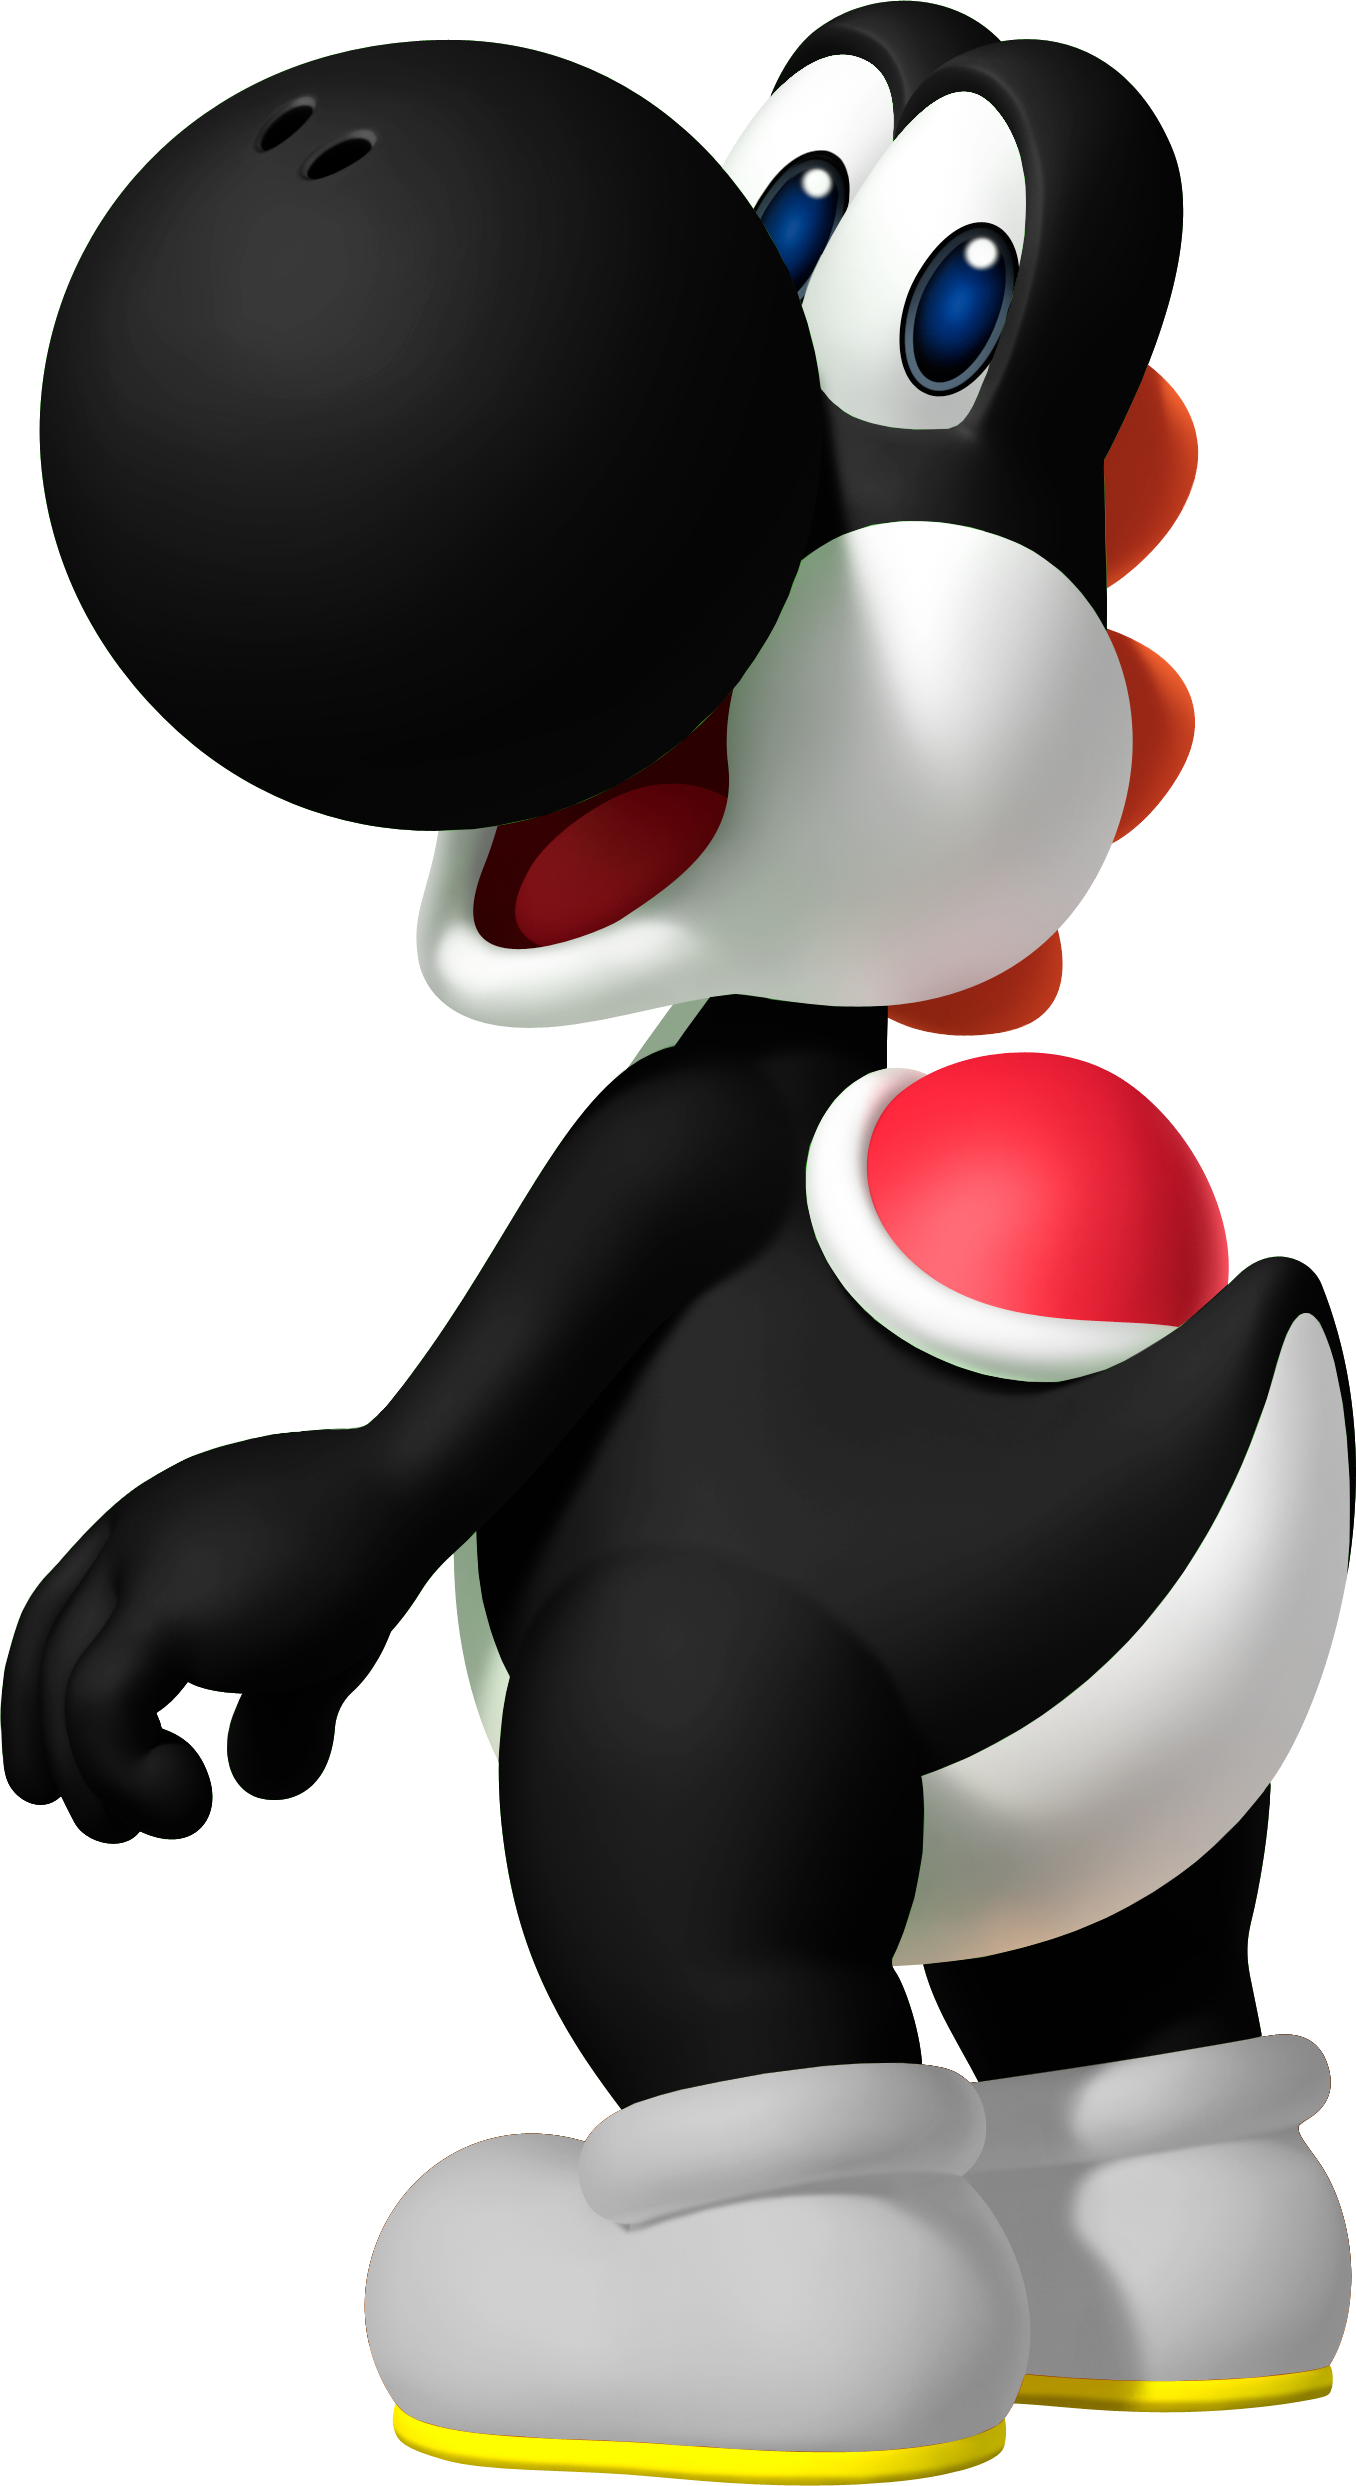 Download Acl Mk8 Black Yoshi PNG Image with No Background 